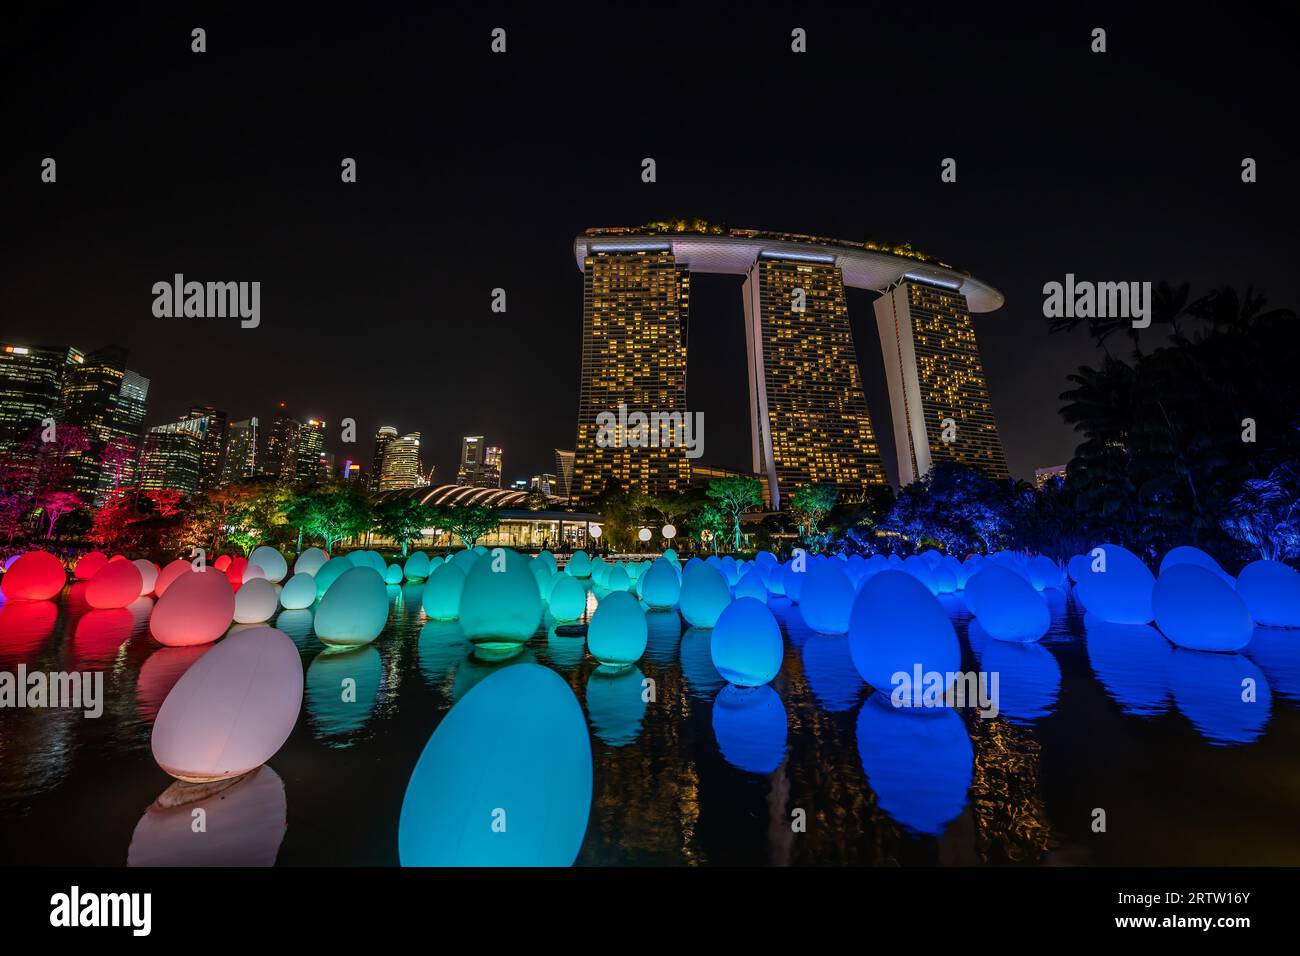 Marina Bay, Singapore - December 30, 2019 : night city skyline at Gardens by The Bay and Marina Bay Sands with new year fortune balloon Stock Photo